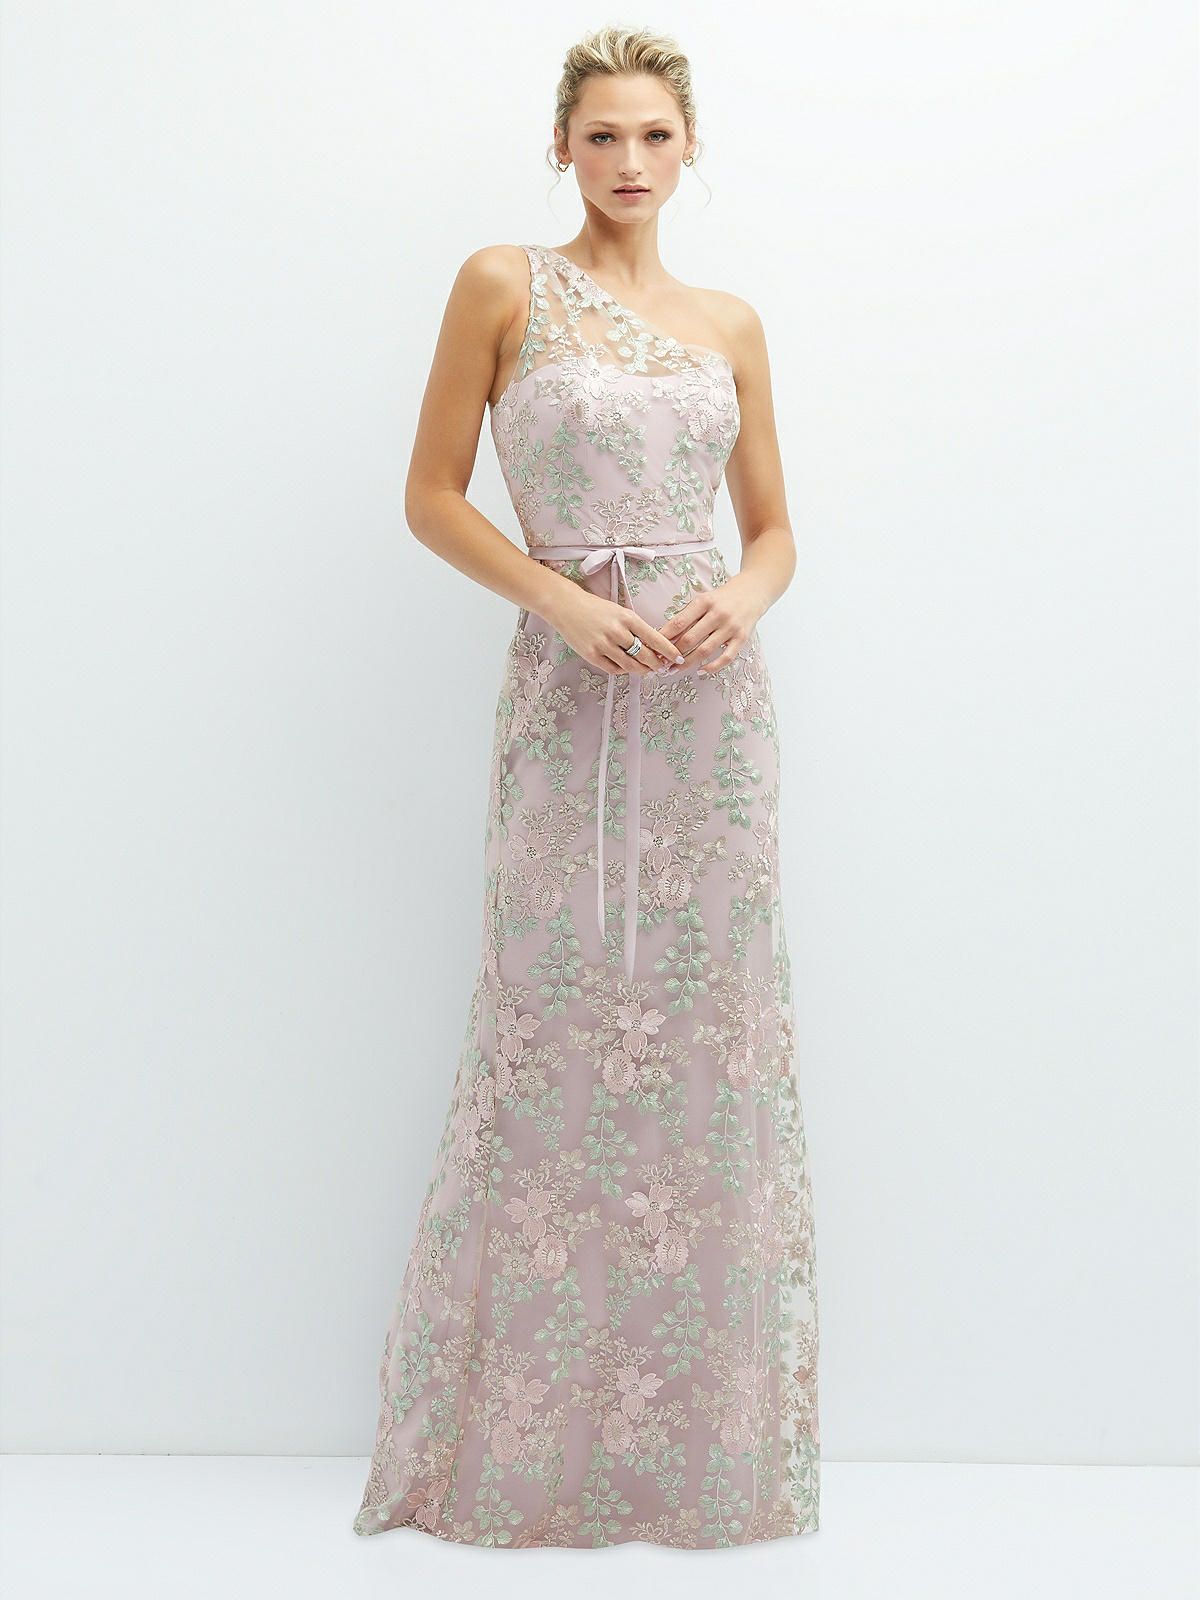 One-Shoulder Fit and Flare Floral Embroidered Dress with Skinny Tie Sash | The Dessy Group